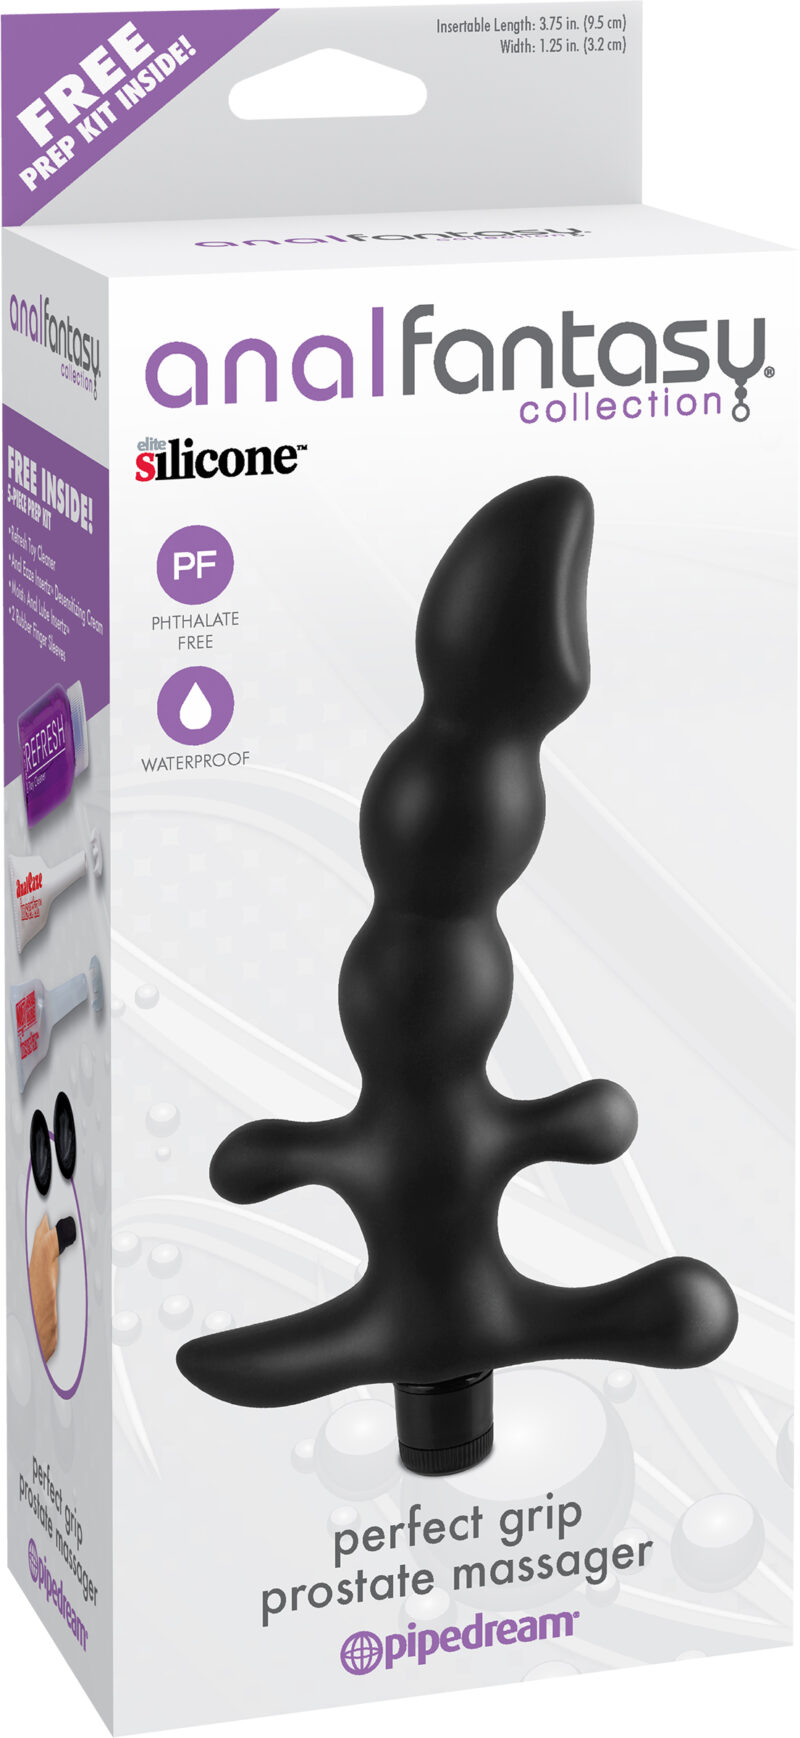 Pipedream Anal Fantasy Perfect Grip Prostate Massager